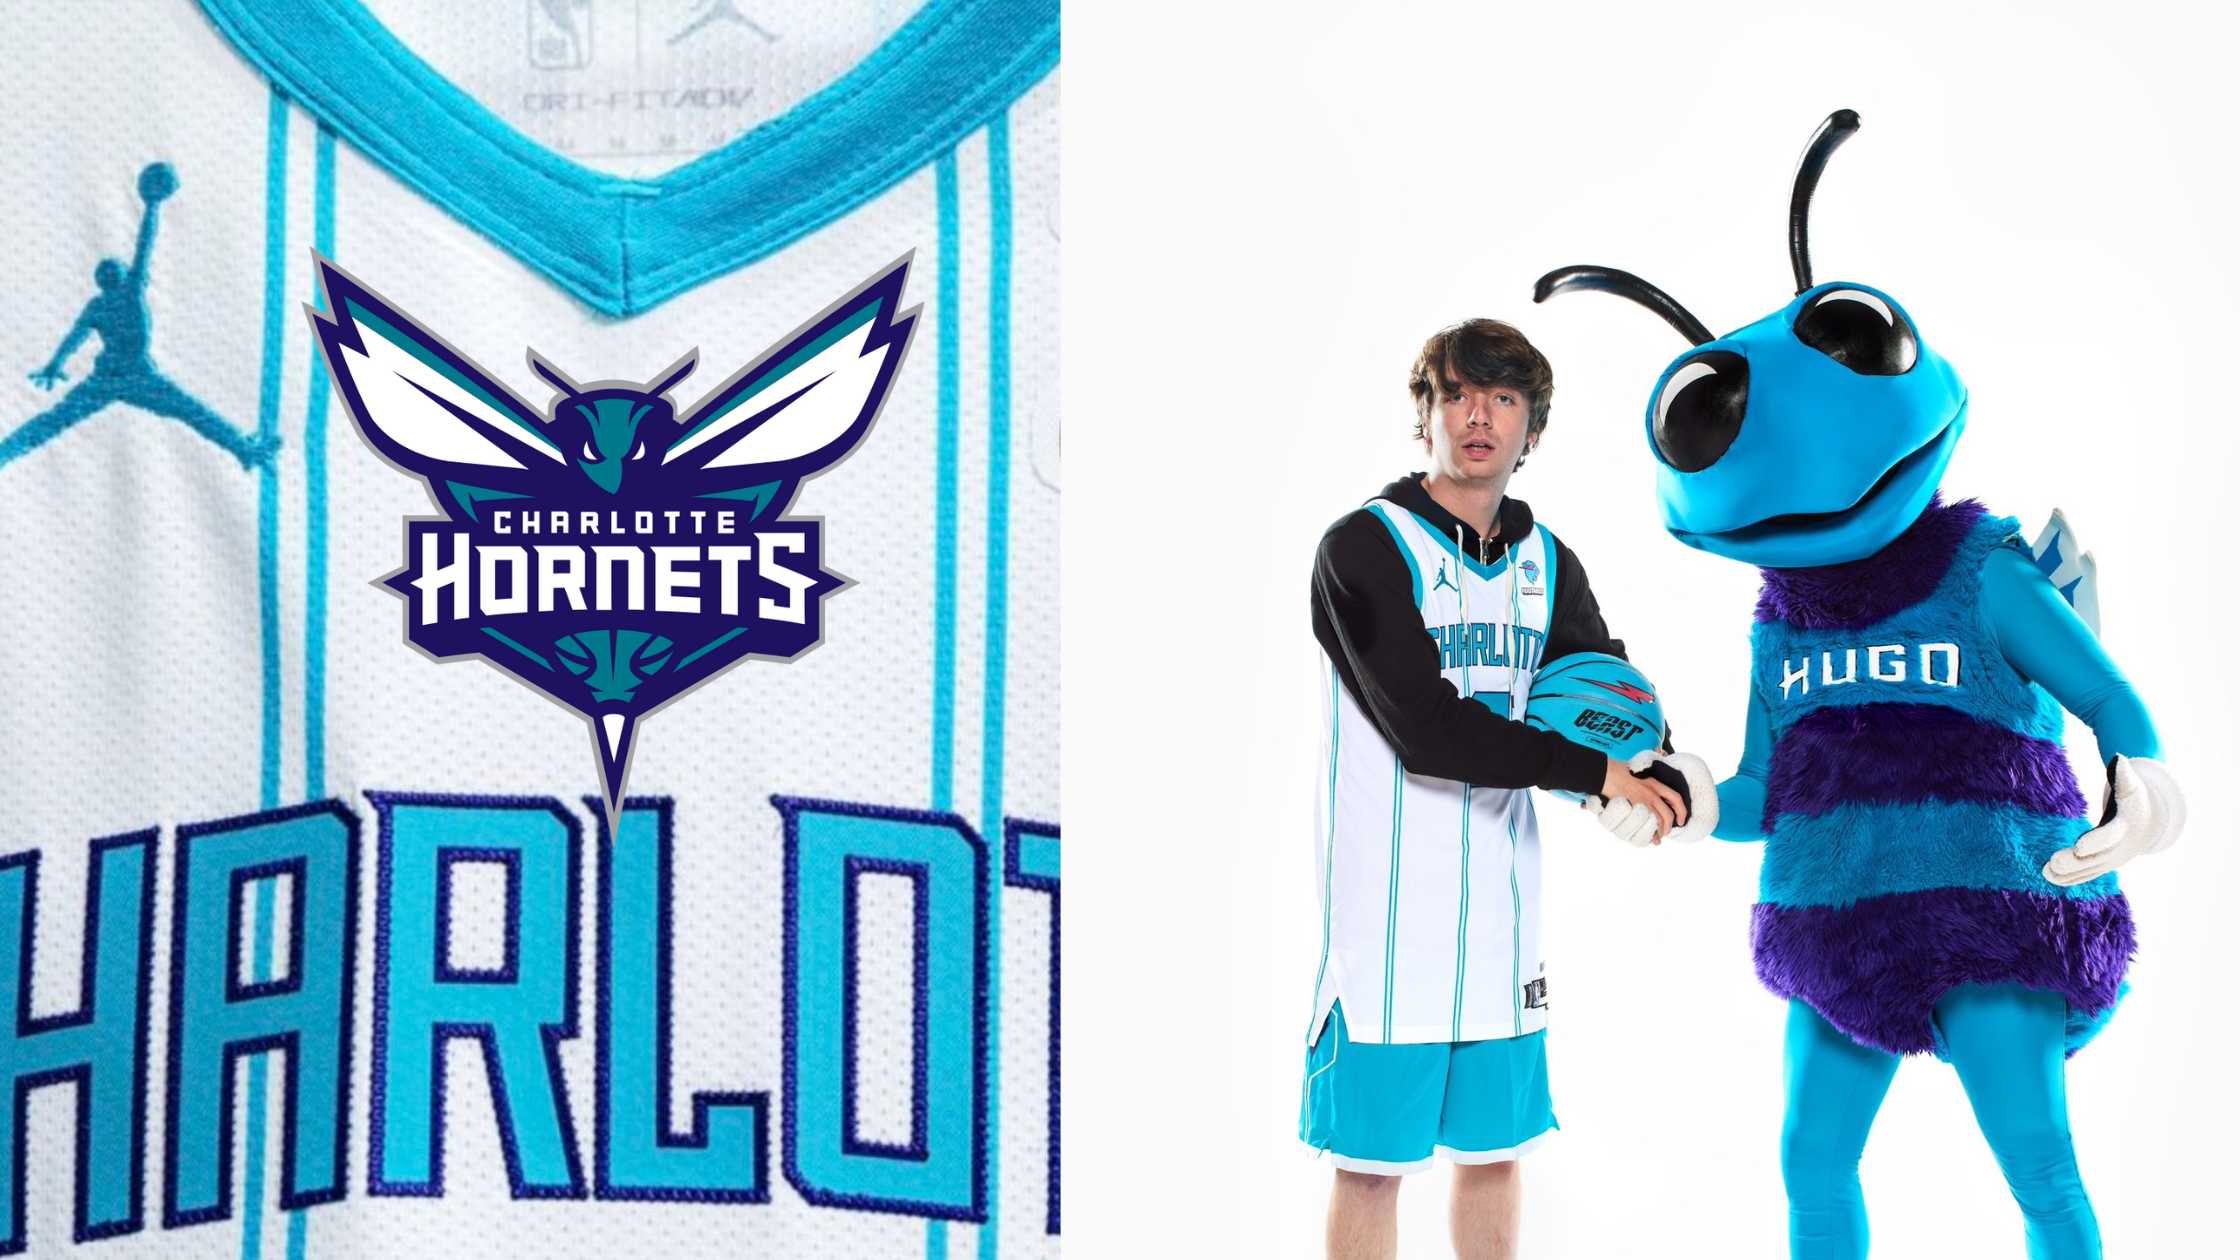 Karl Jacobs From Mrbeast Joins Charlotte Hornets as a Starting Player